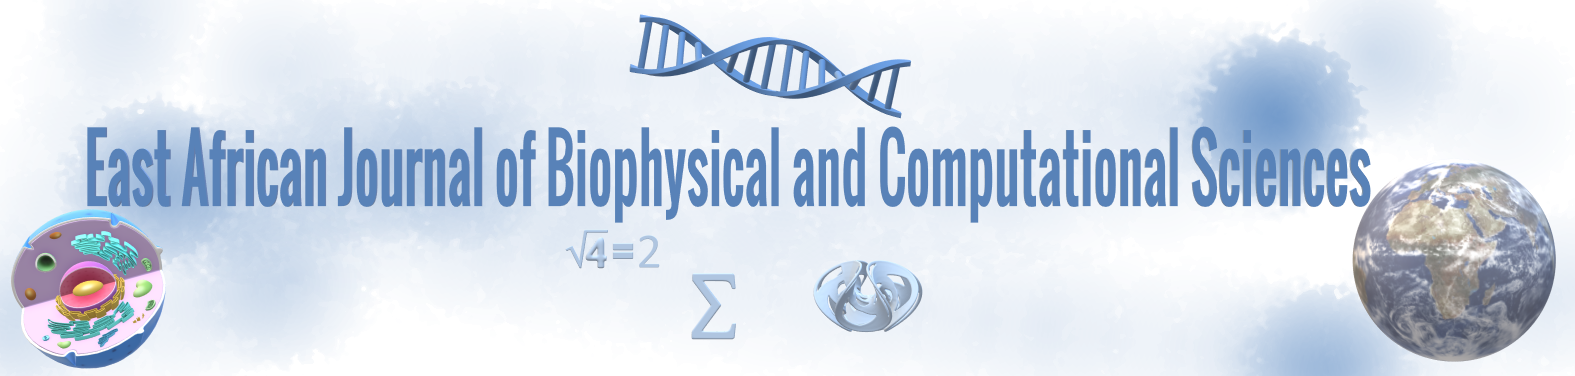 East African Journal of Biophysical and Computational Sciences